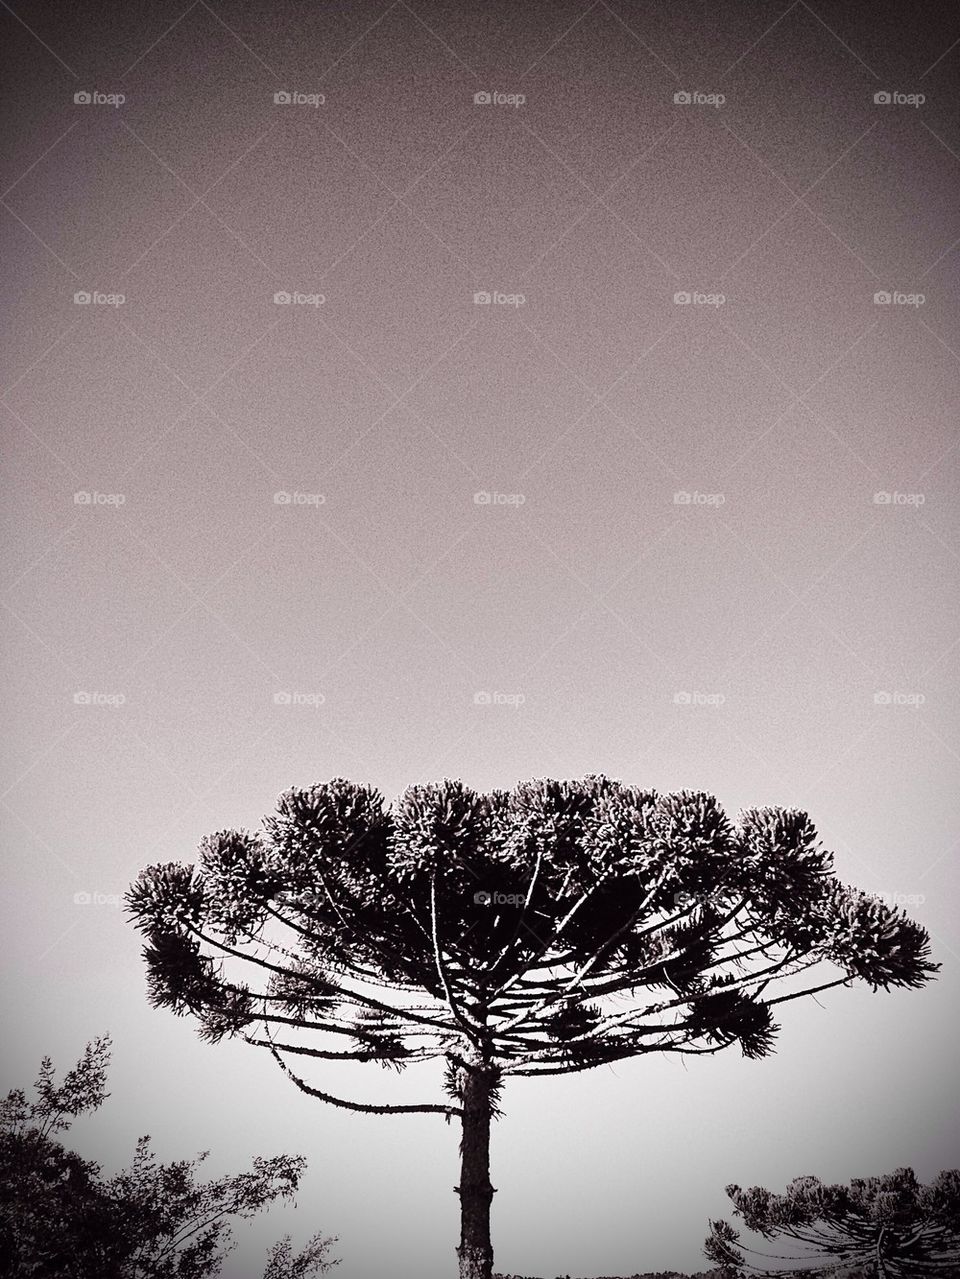 Low angle view of araucaria tree